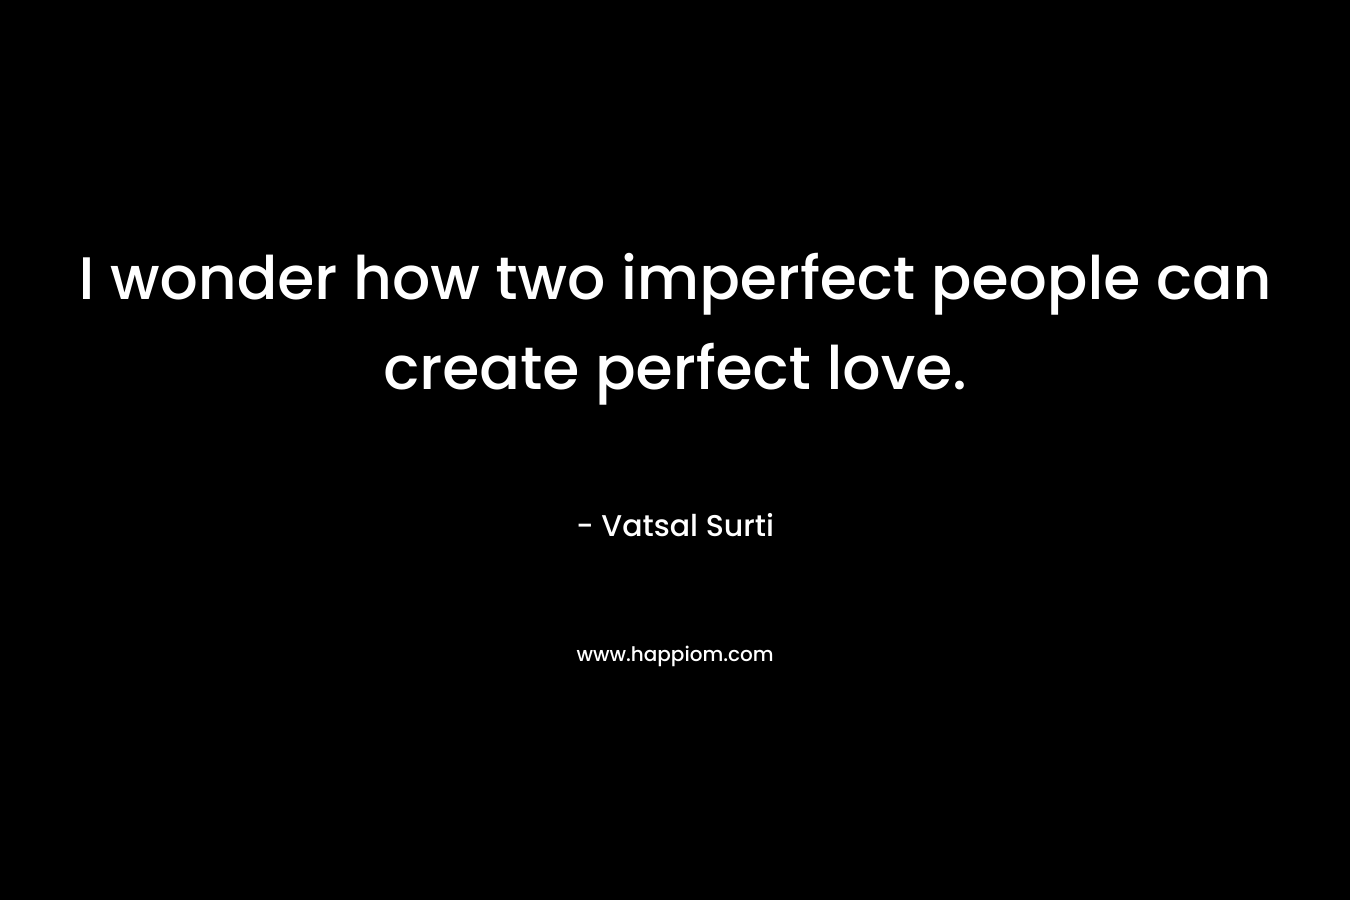 I wonder how two imperfect people can create perfect love. – Vatsal Surti